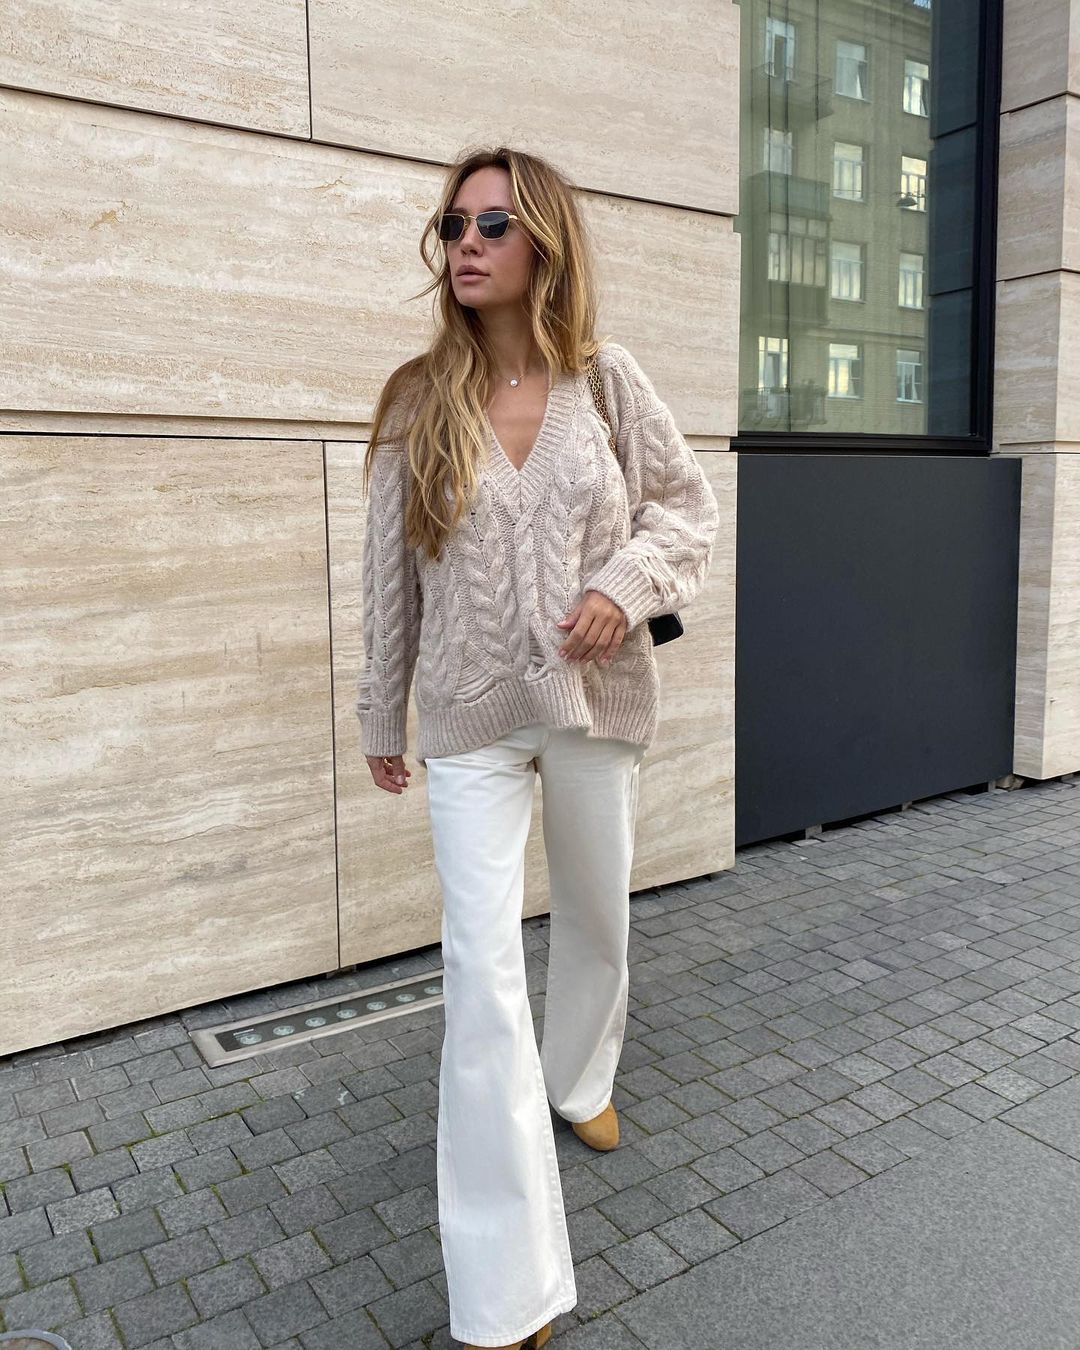 A Neutral Sweater is a Fall/Winter Must-Buy | Le Fashion | Bloglovin'